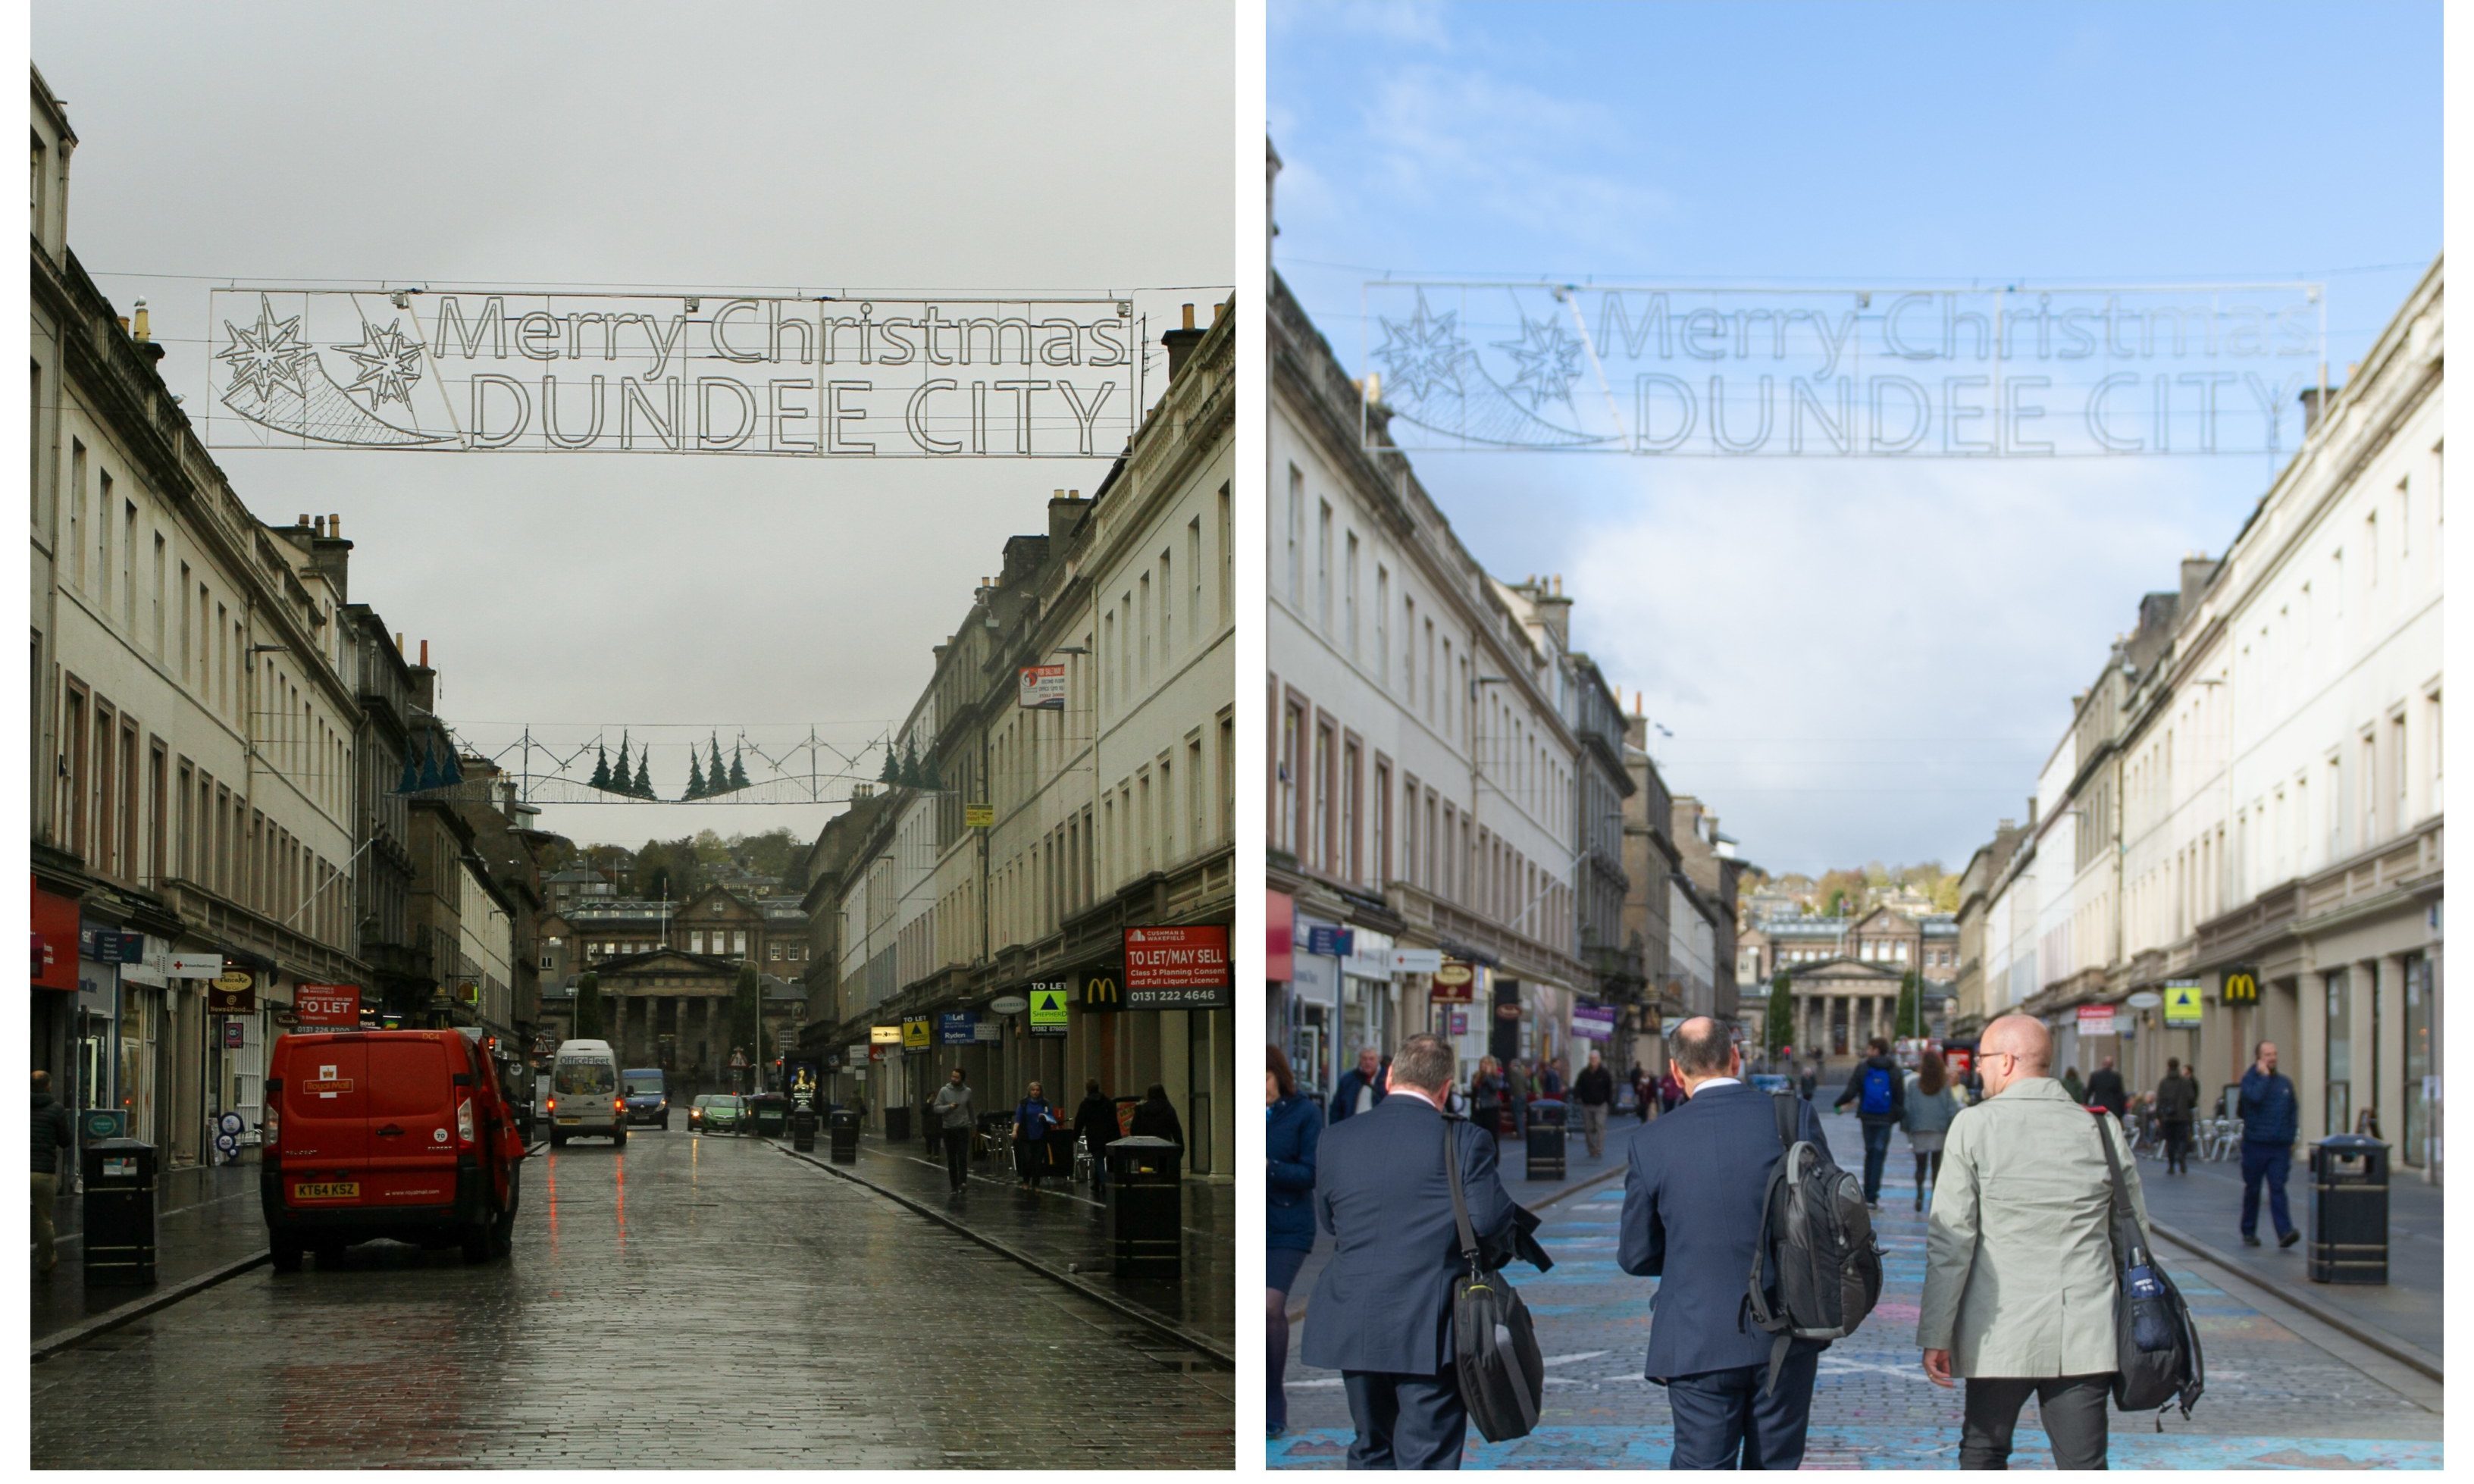 Reform Street in 2012, left, and 2018, right.